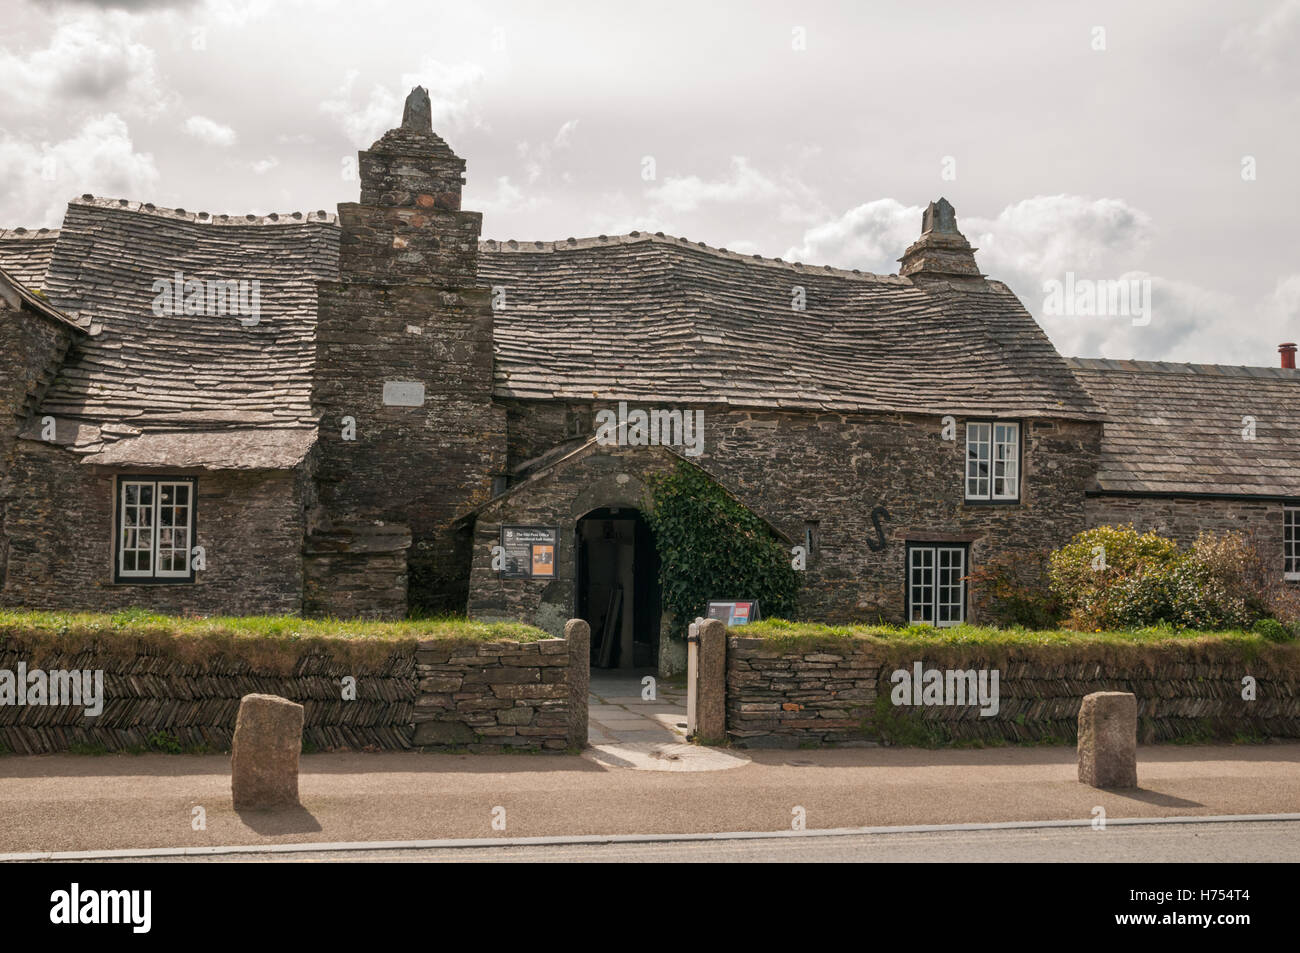 The Old Post Office, Tintagel, Cornwall. Traditional, stone and slate medieval long house. National Trust property. Stock Photo